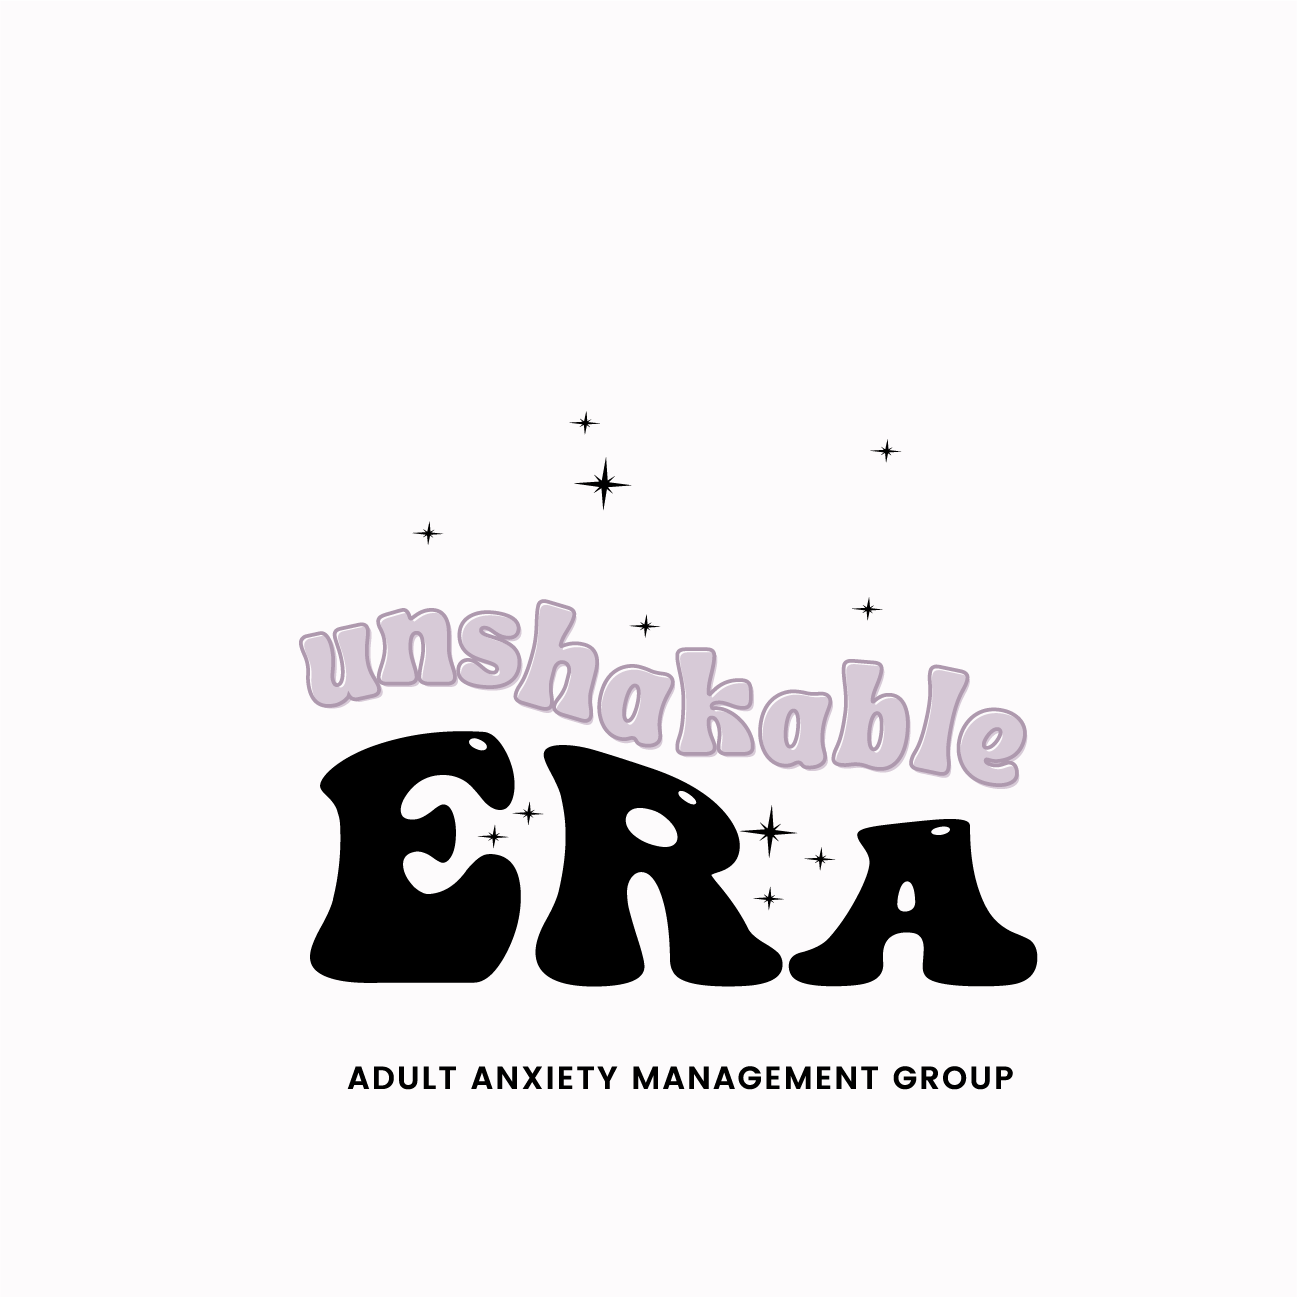 unshakable era: Adult anxiety management group